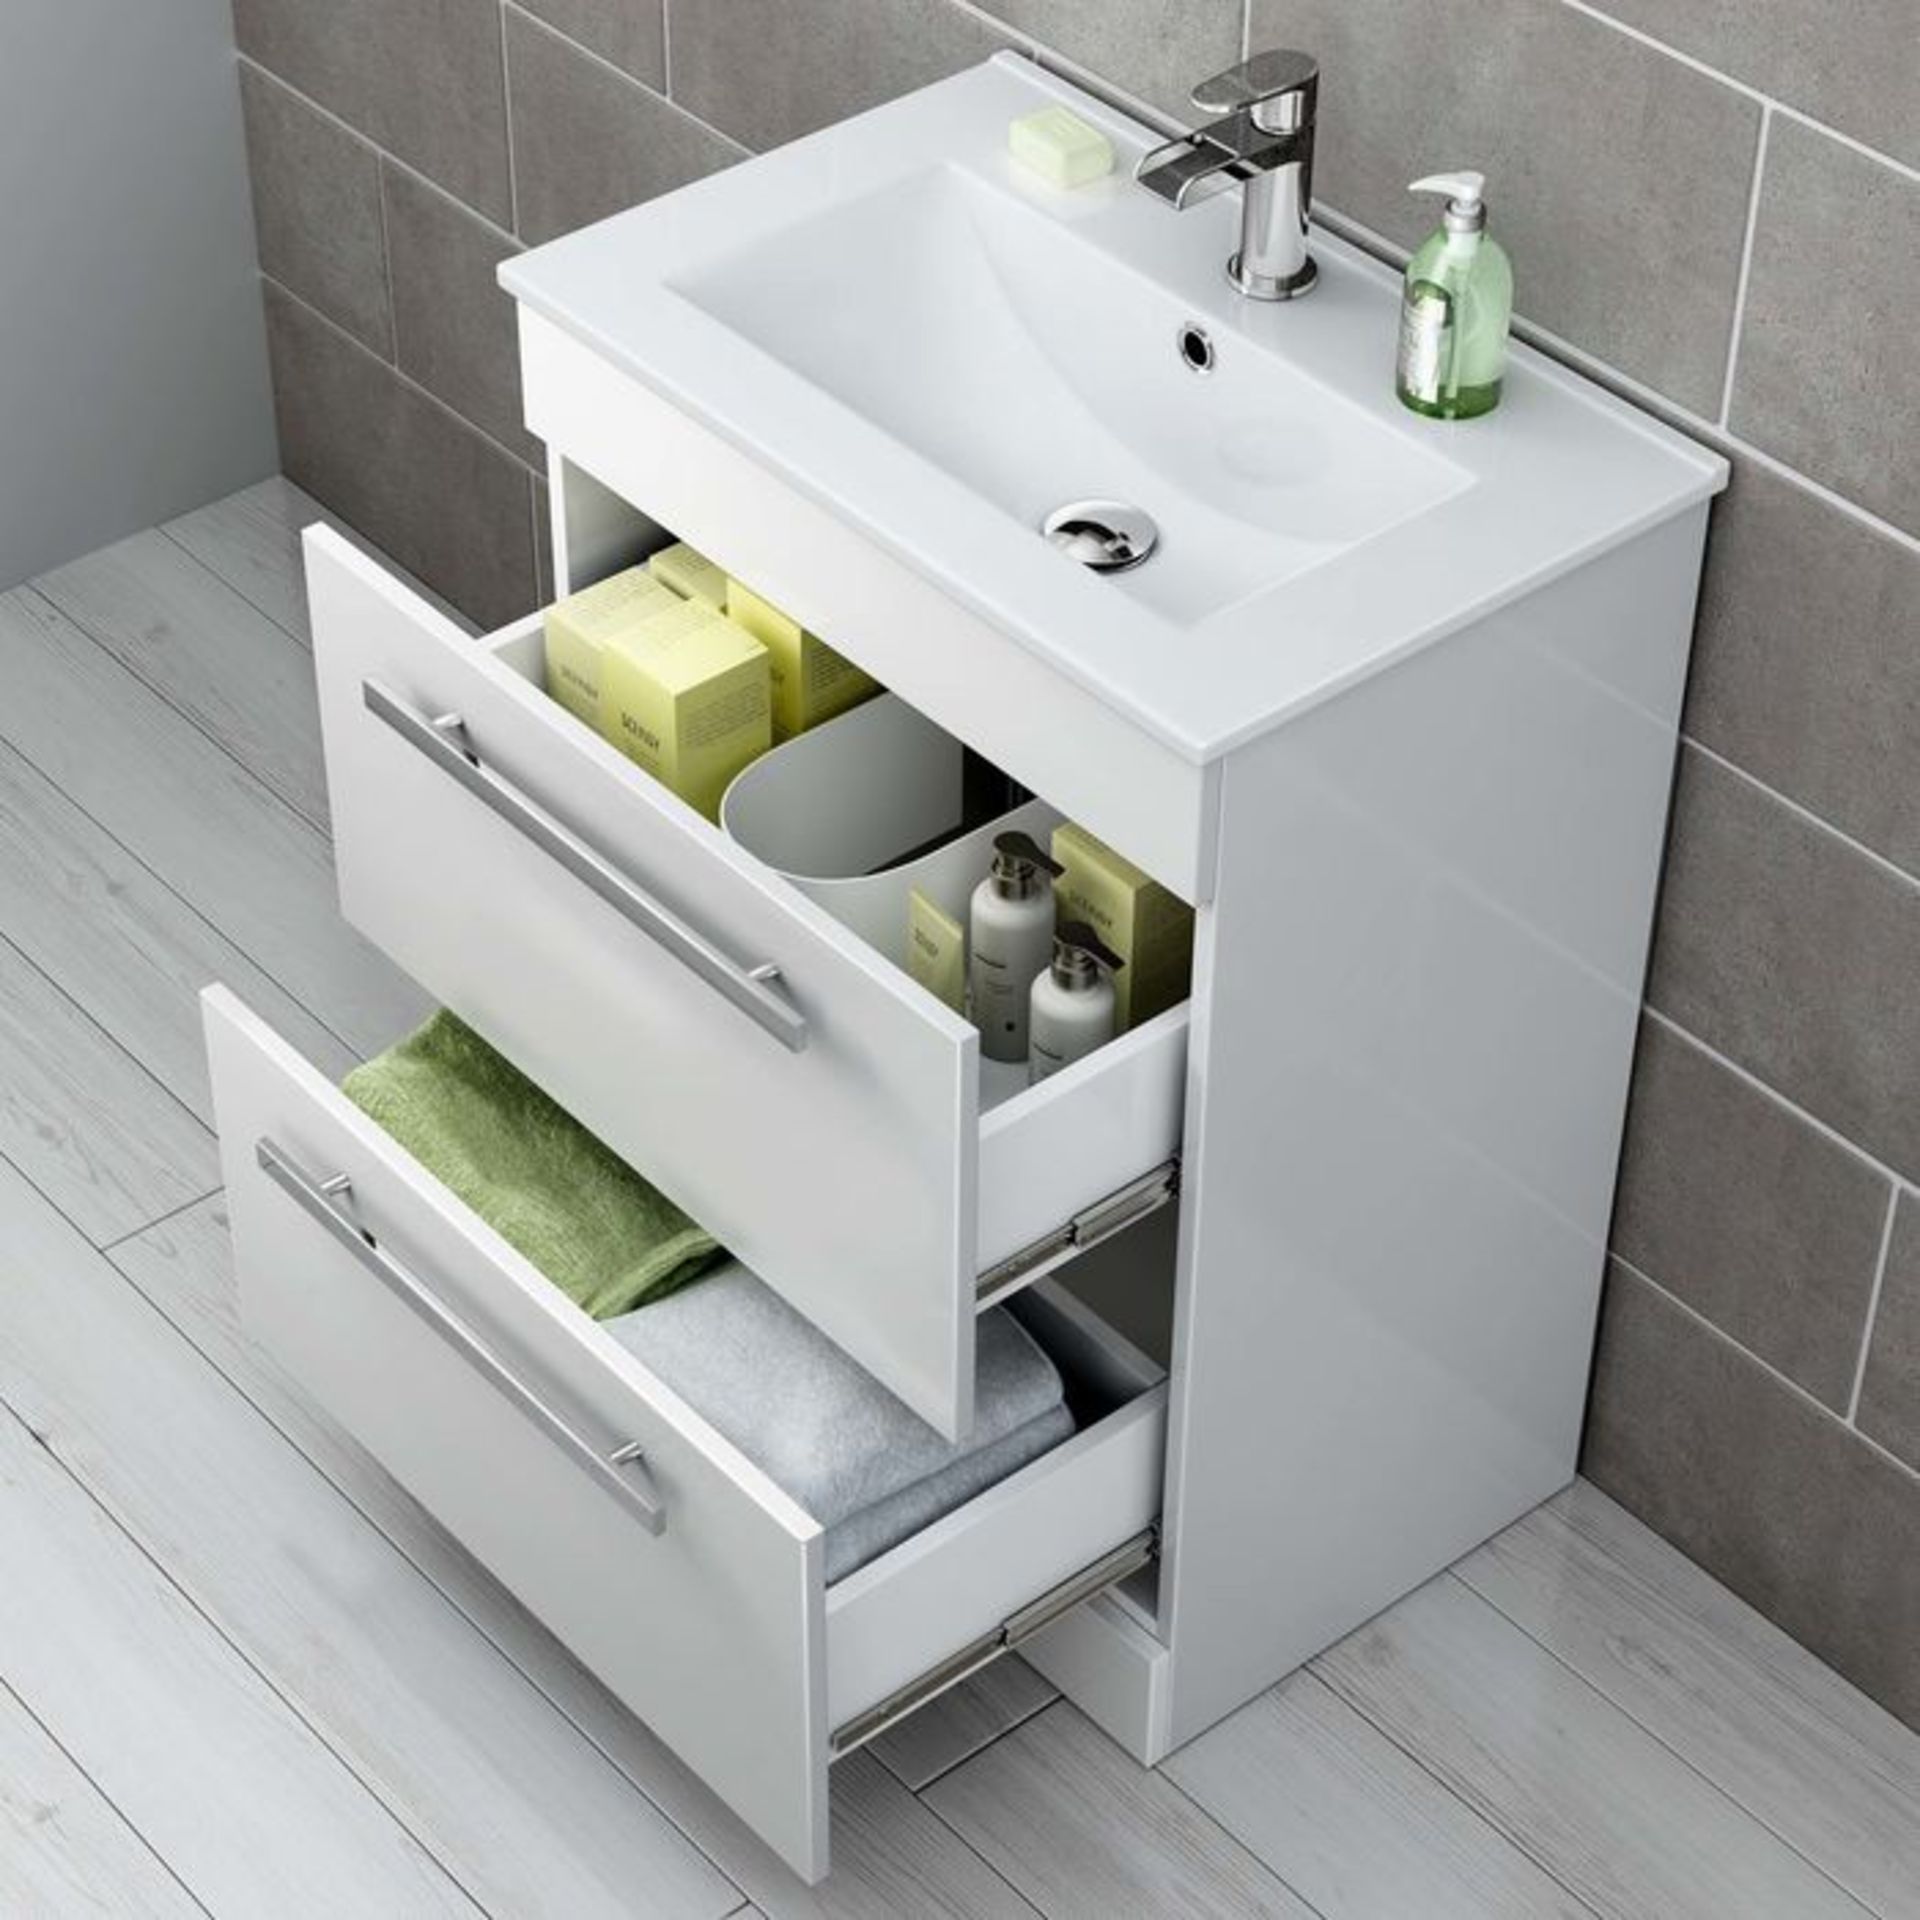 (DK305) 600mm Avon High Gloss White Double Drawer Basin Cabinet - Floor Standing. RRP £499.99. Comes - Image 2 of 5